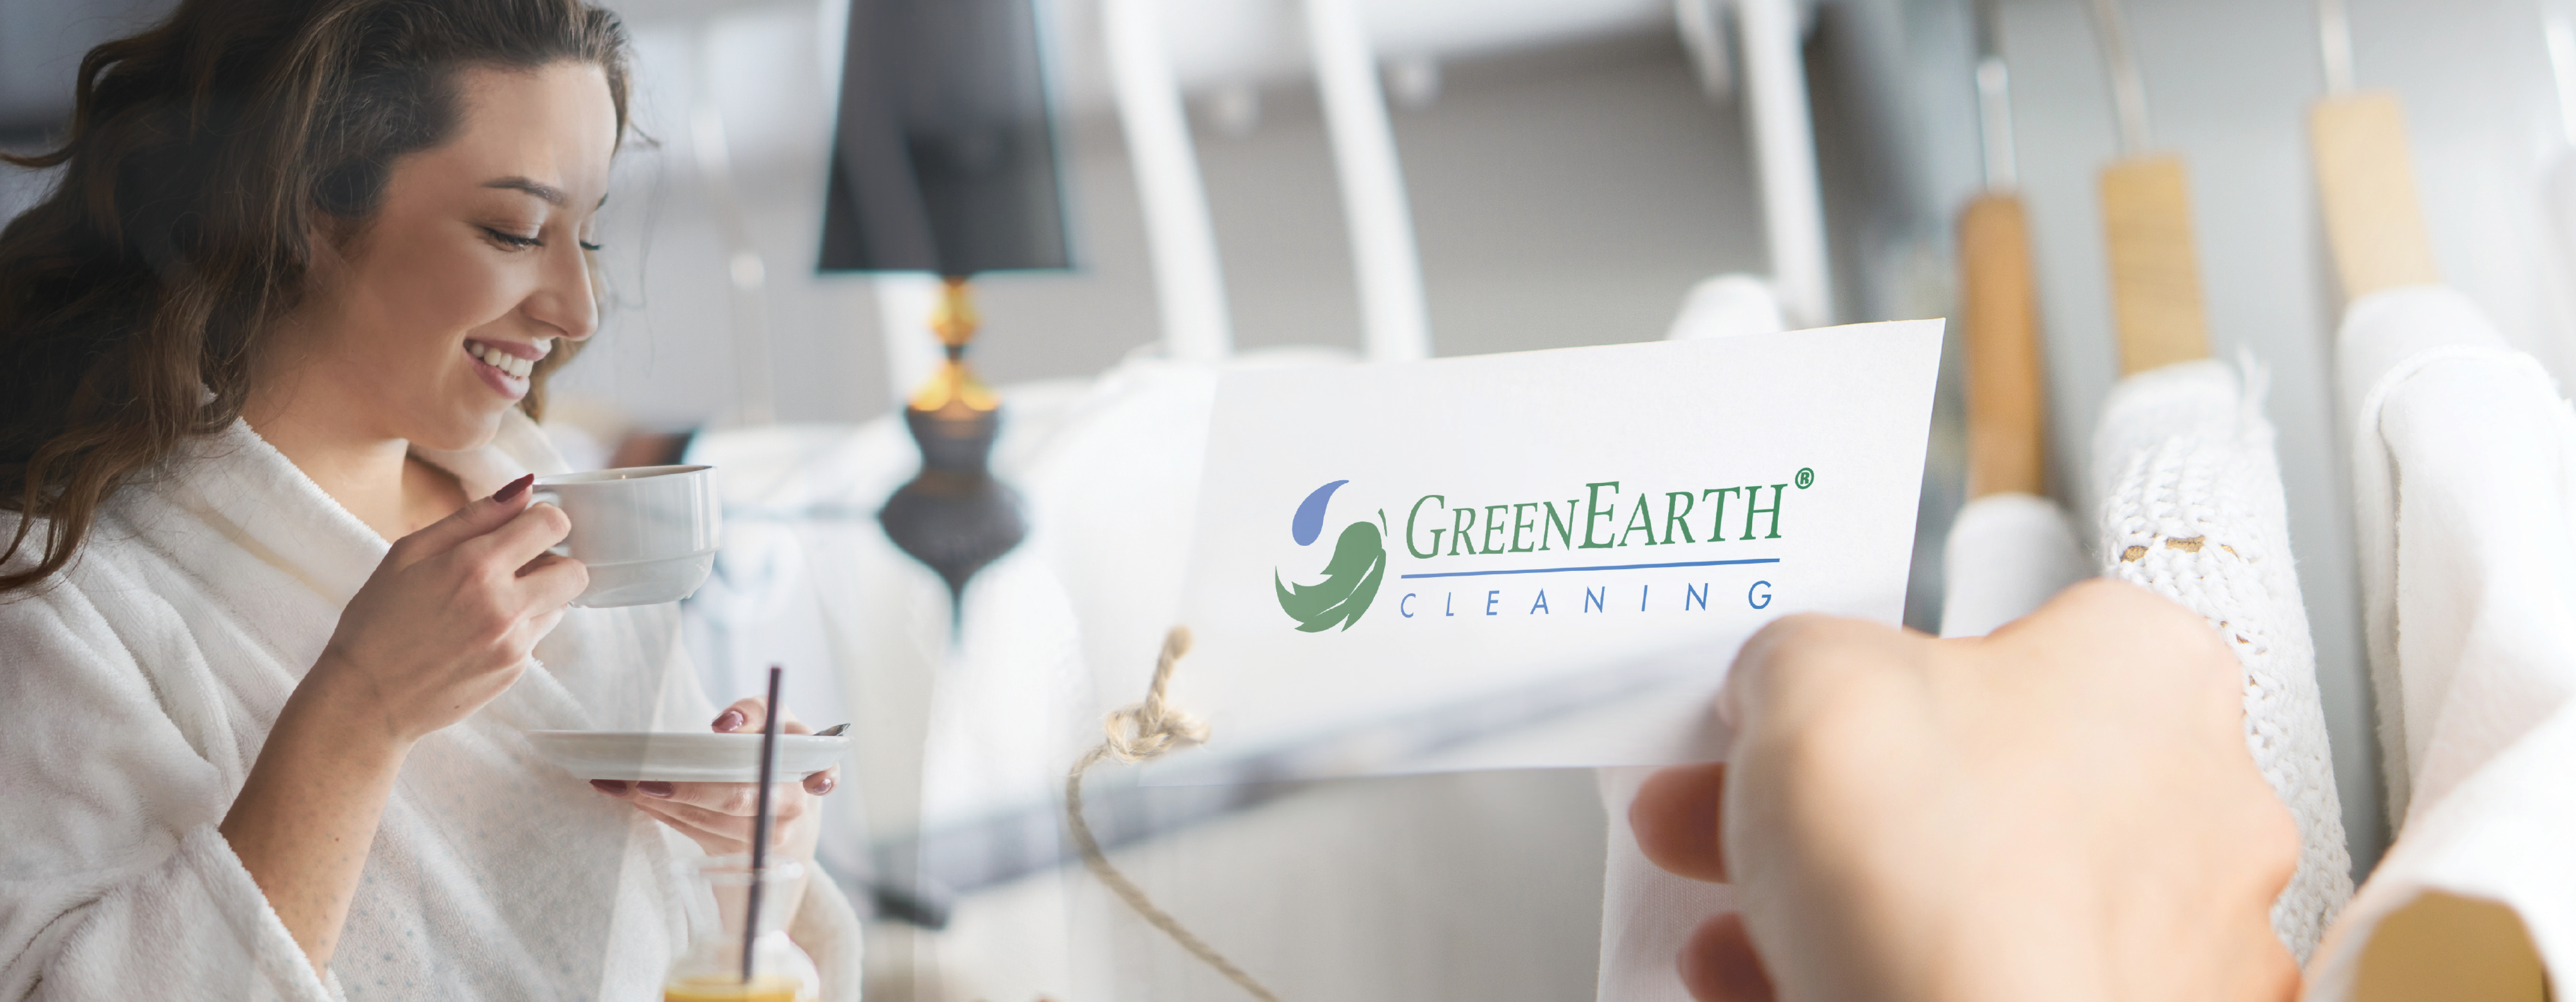 Embrace Sustainability: GreenEarth Cleaning Revolutionizes Hotel Dry Cleaning Industry